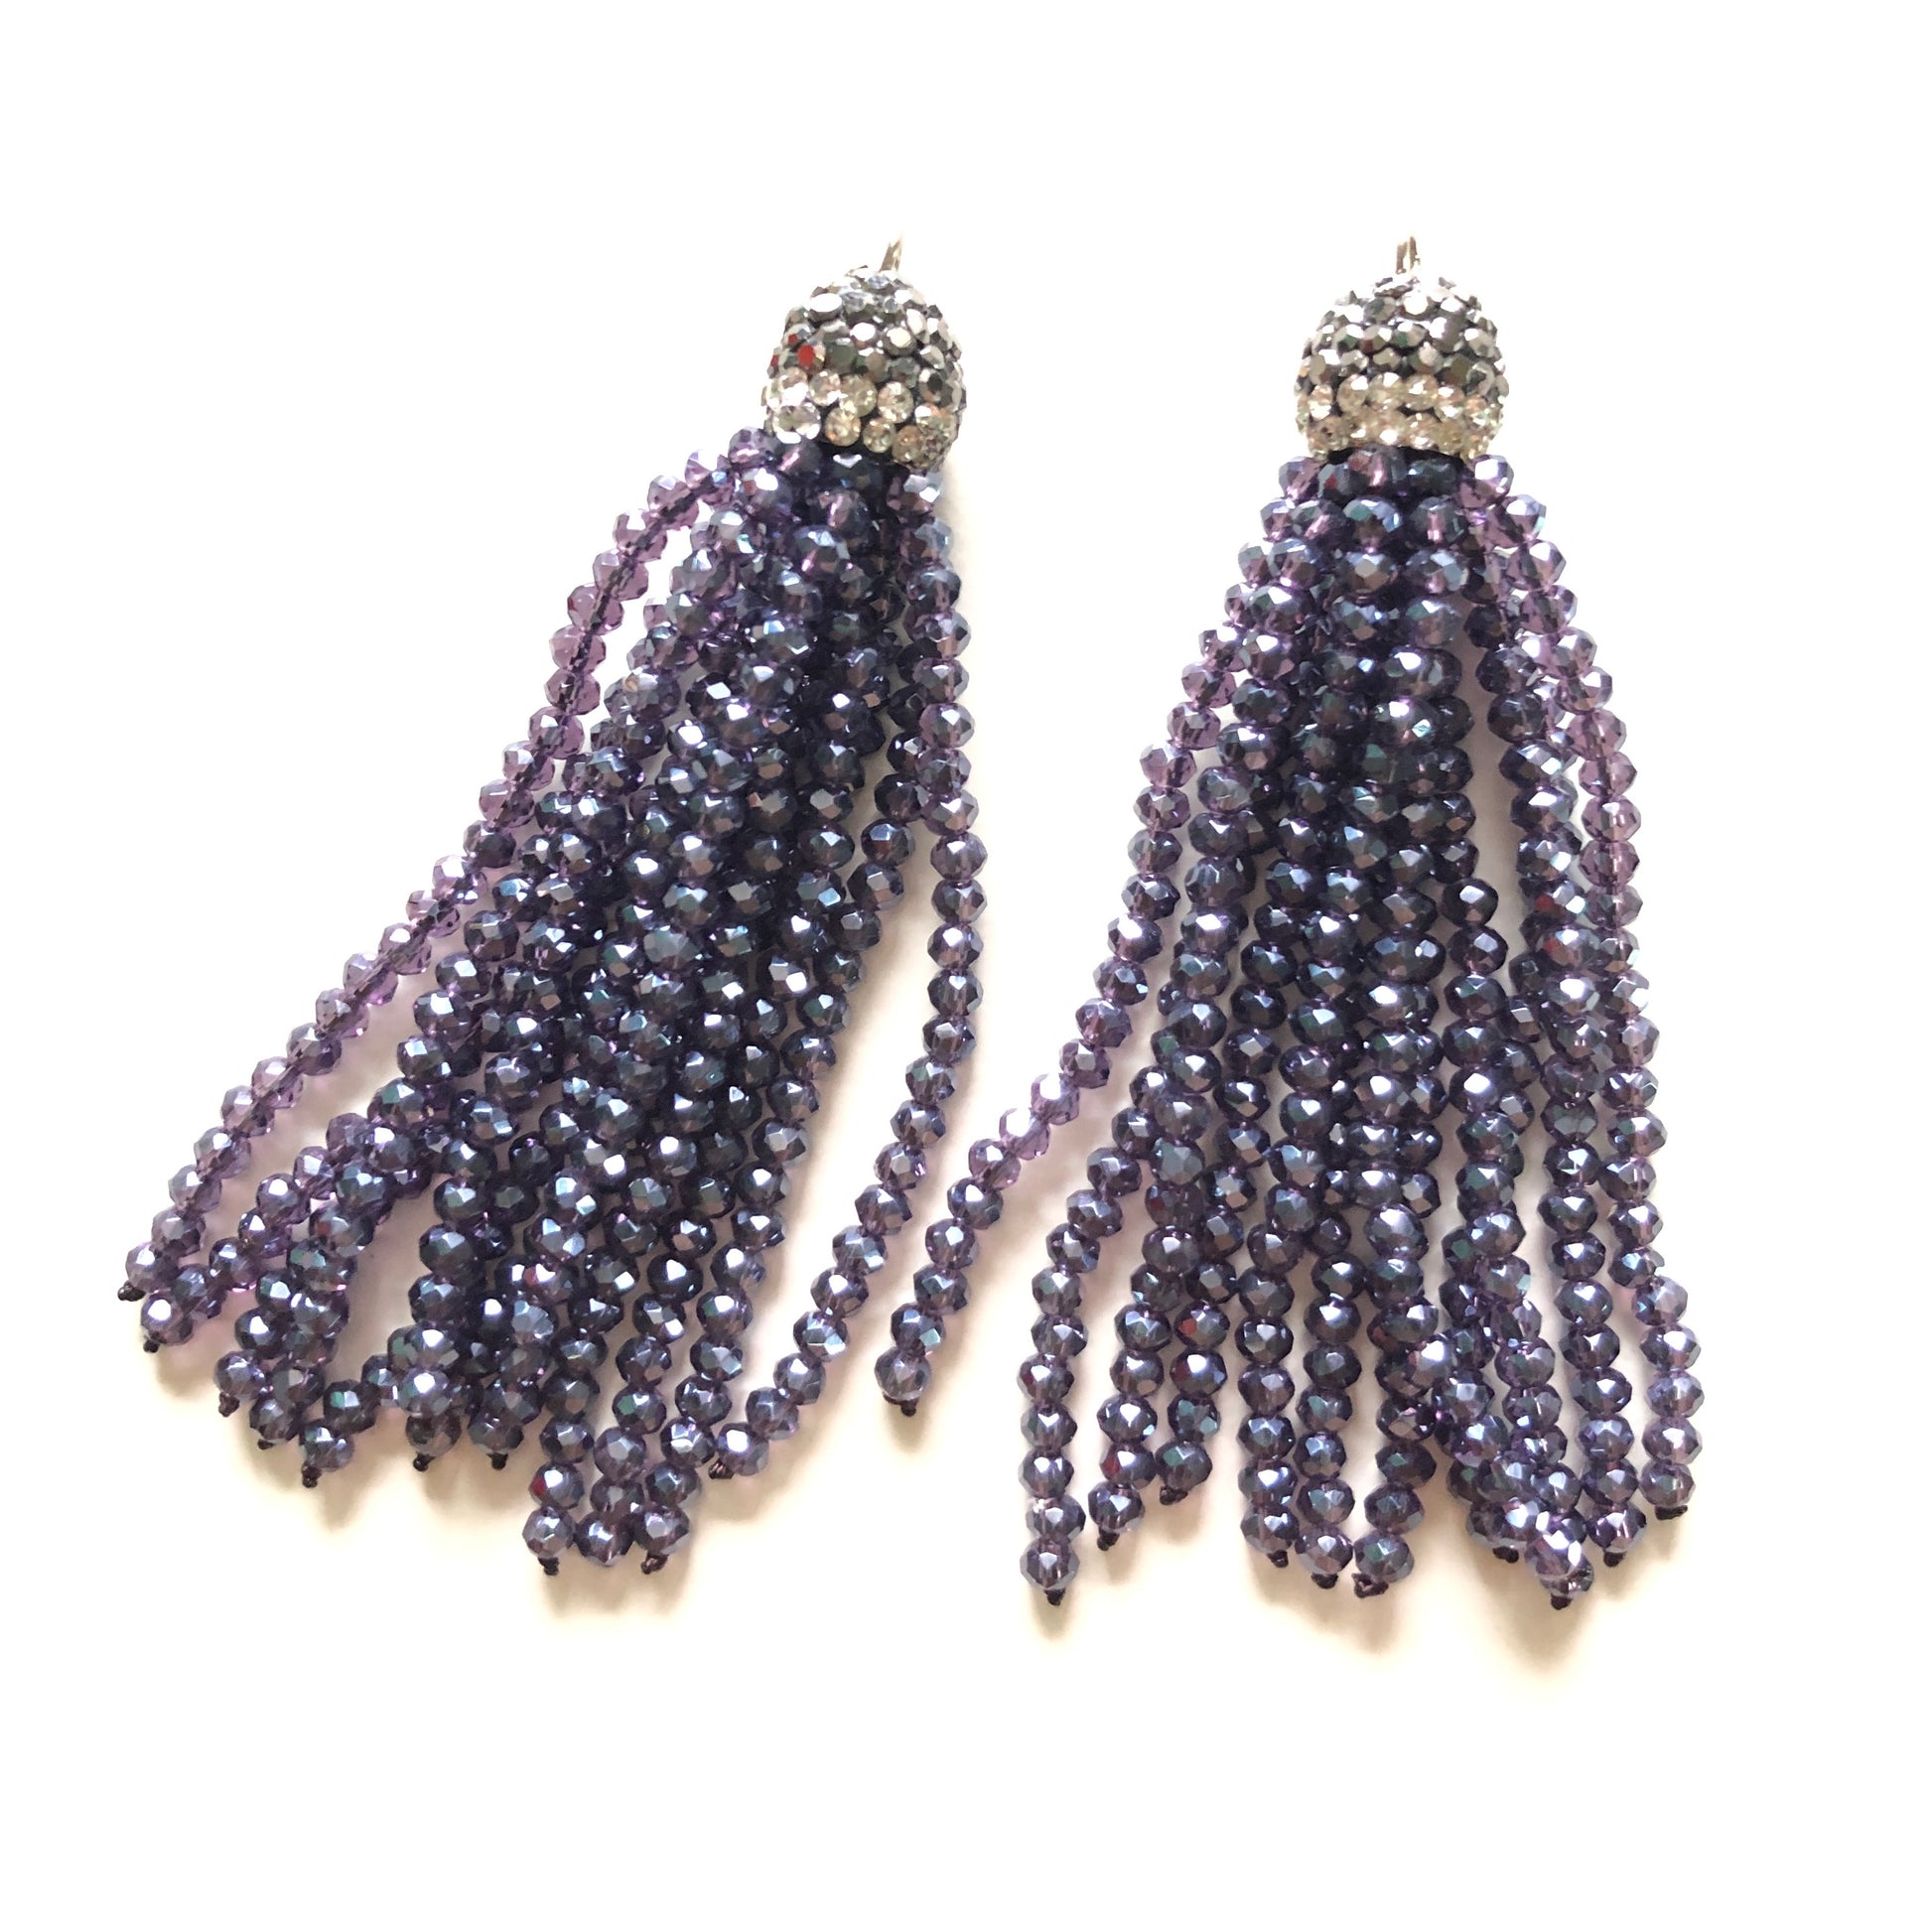 3pcs/lot Clear Purple Crystal Tassel Pendant for Jewelry Making Crystal Tassels Charms Beads Beyond